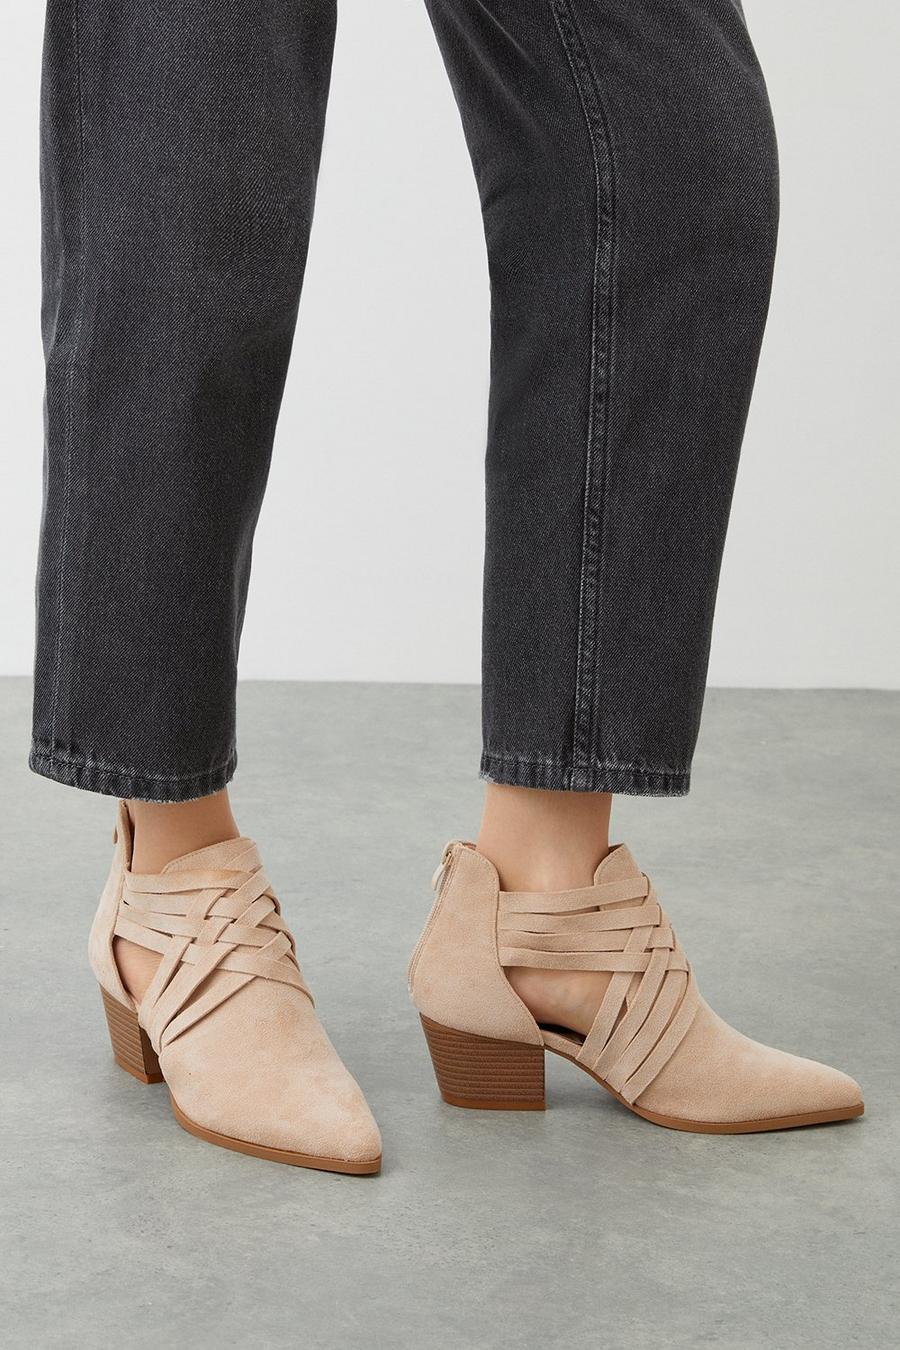 Adeline Cut Out Ankle Boots